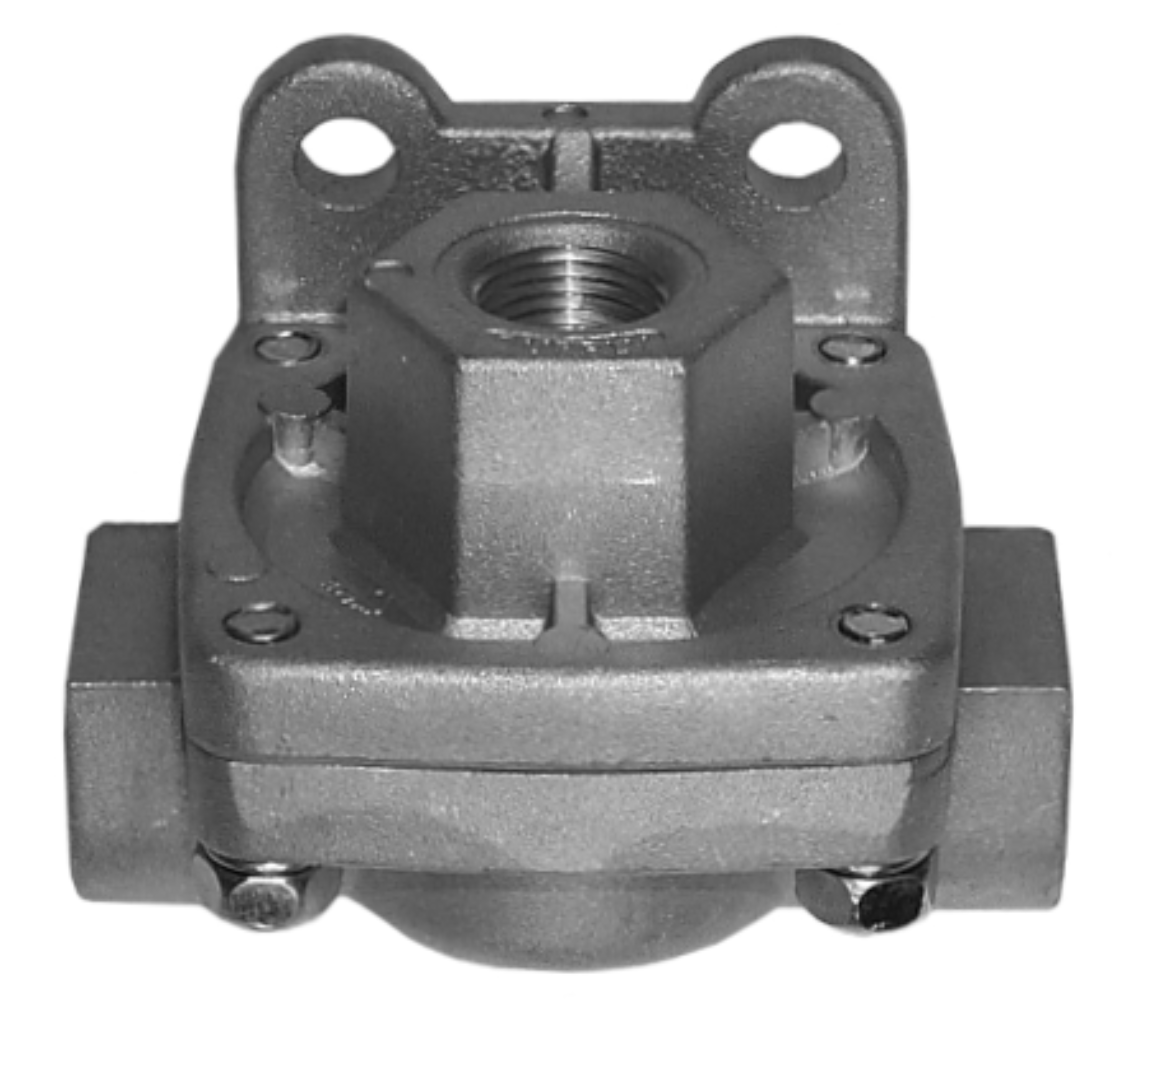 Picture of QUICK RELEASE VALVE QR1 STYLE (3/8" SUPPLY, DELIVERY & EXHAUST PORTS, 1 PSI)
(REPLACES 229859, 288251, 274997)